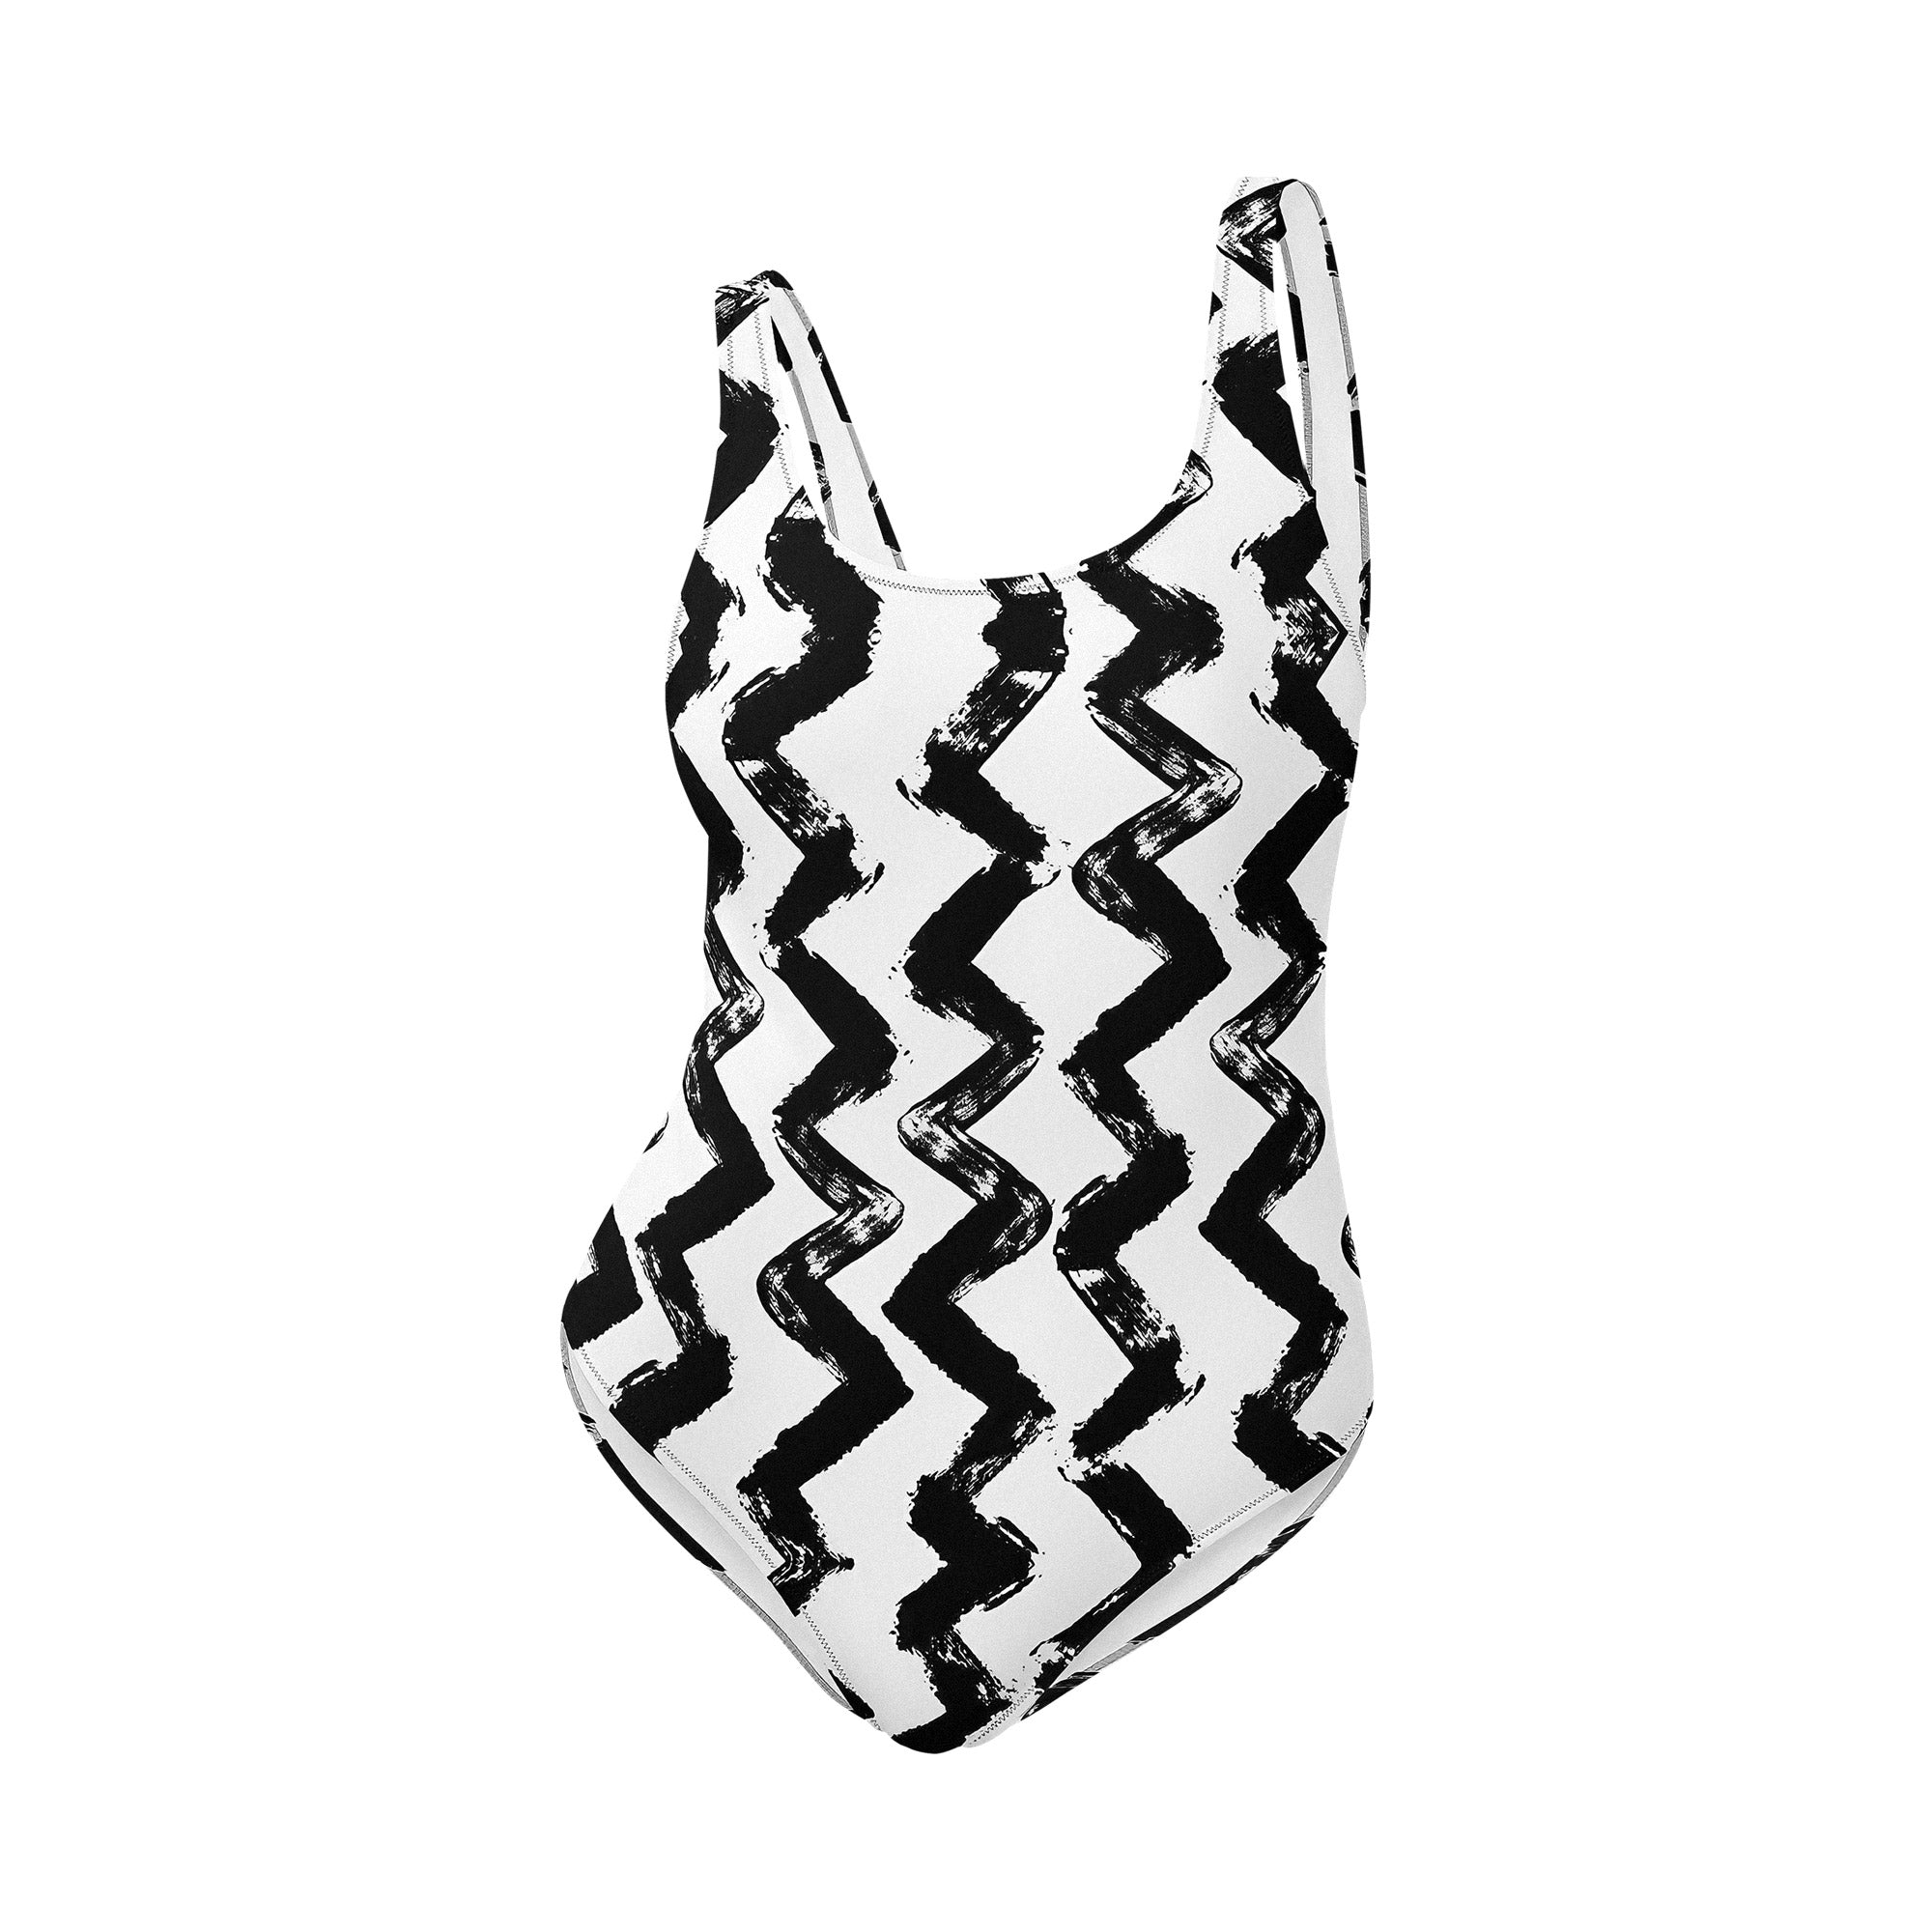 This swimsuit, suitable for every body type, enhances your most attractive qualities. Revel in the silky texture and the complementing design as you flaunt it by the beach or pool.